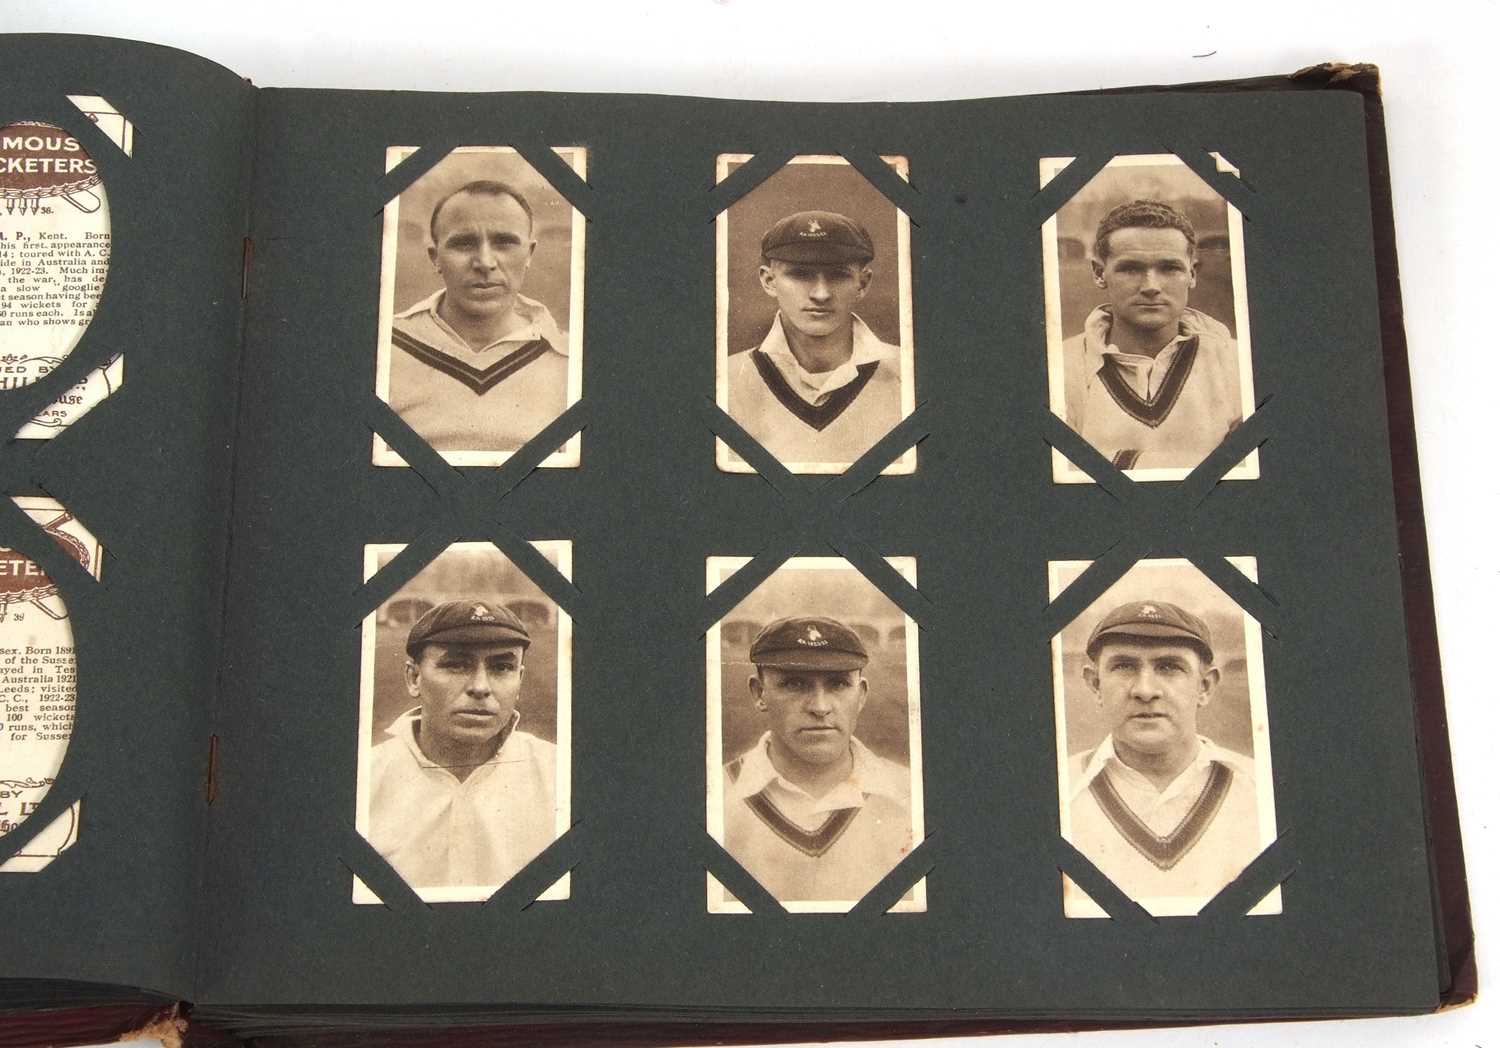 Autograph album containing various signatures of England cricketers including Fred Root, England and - Image 8 of 21